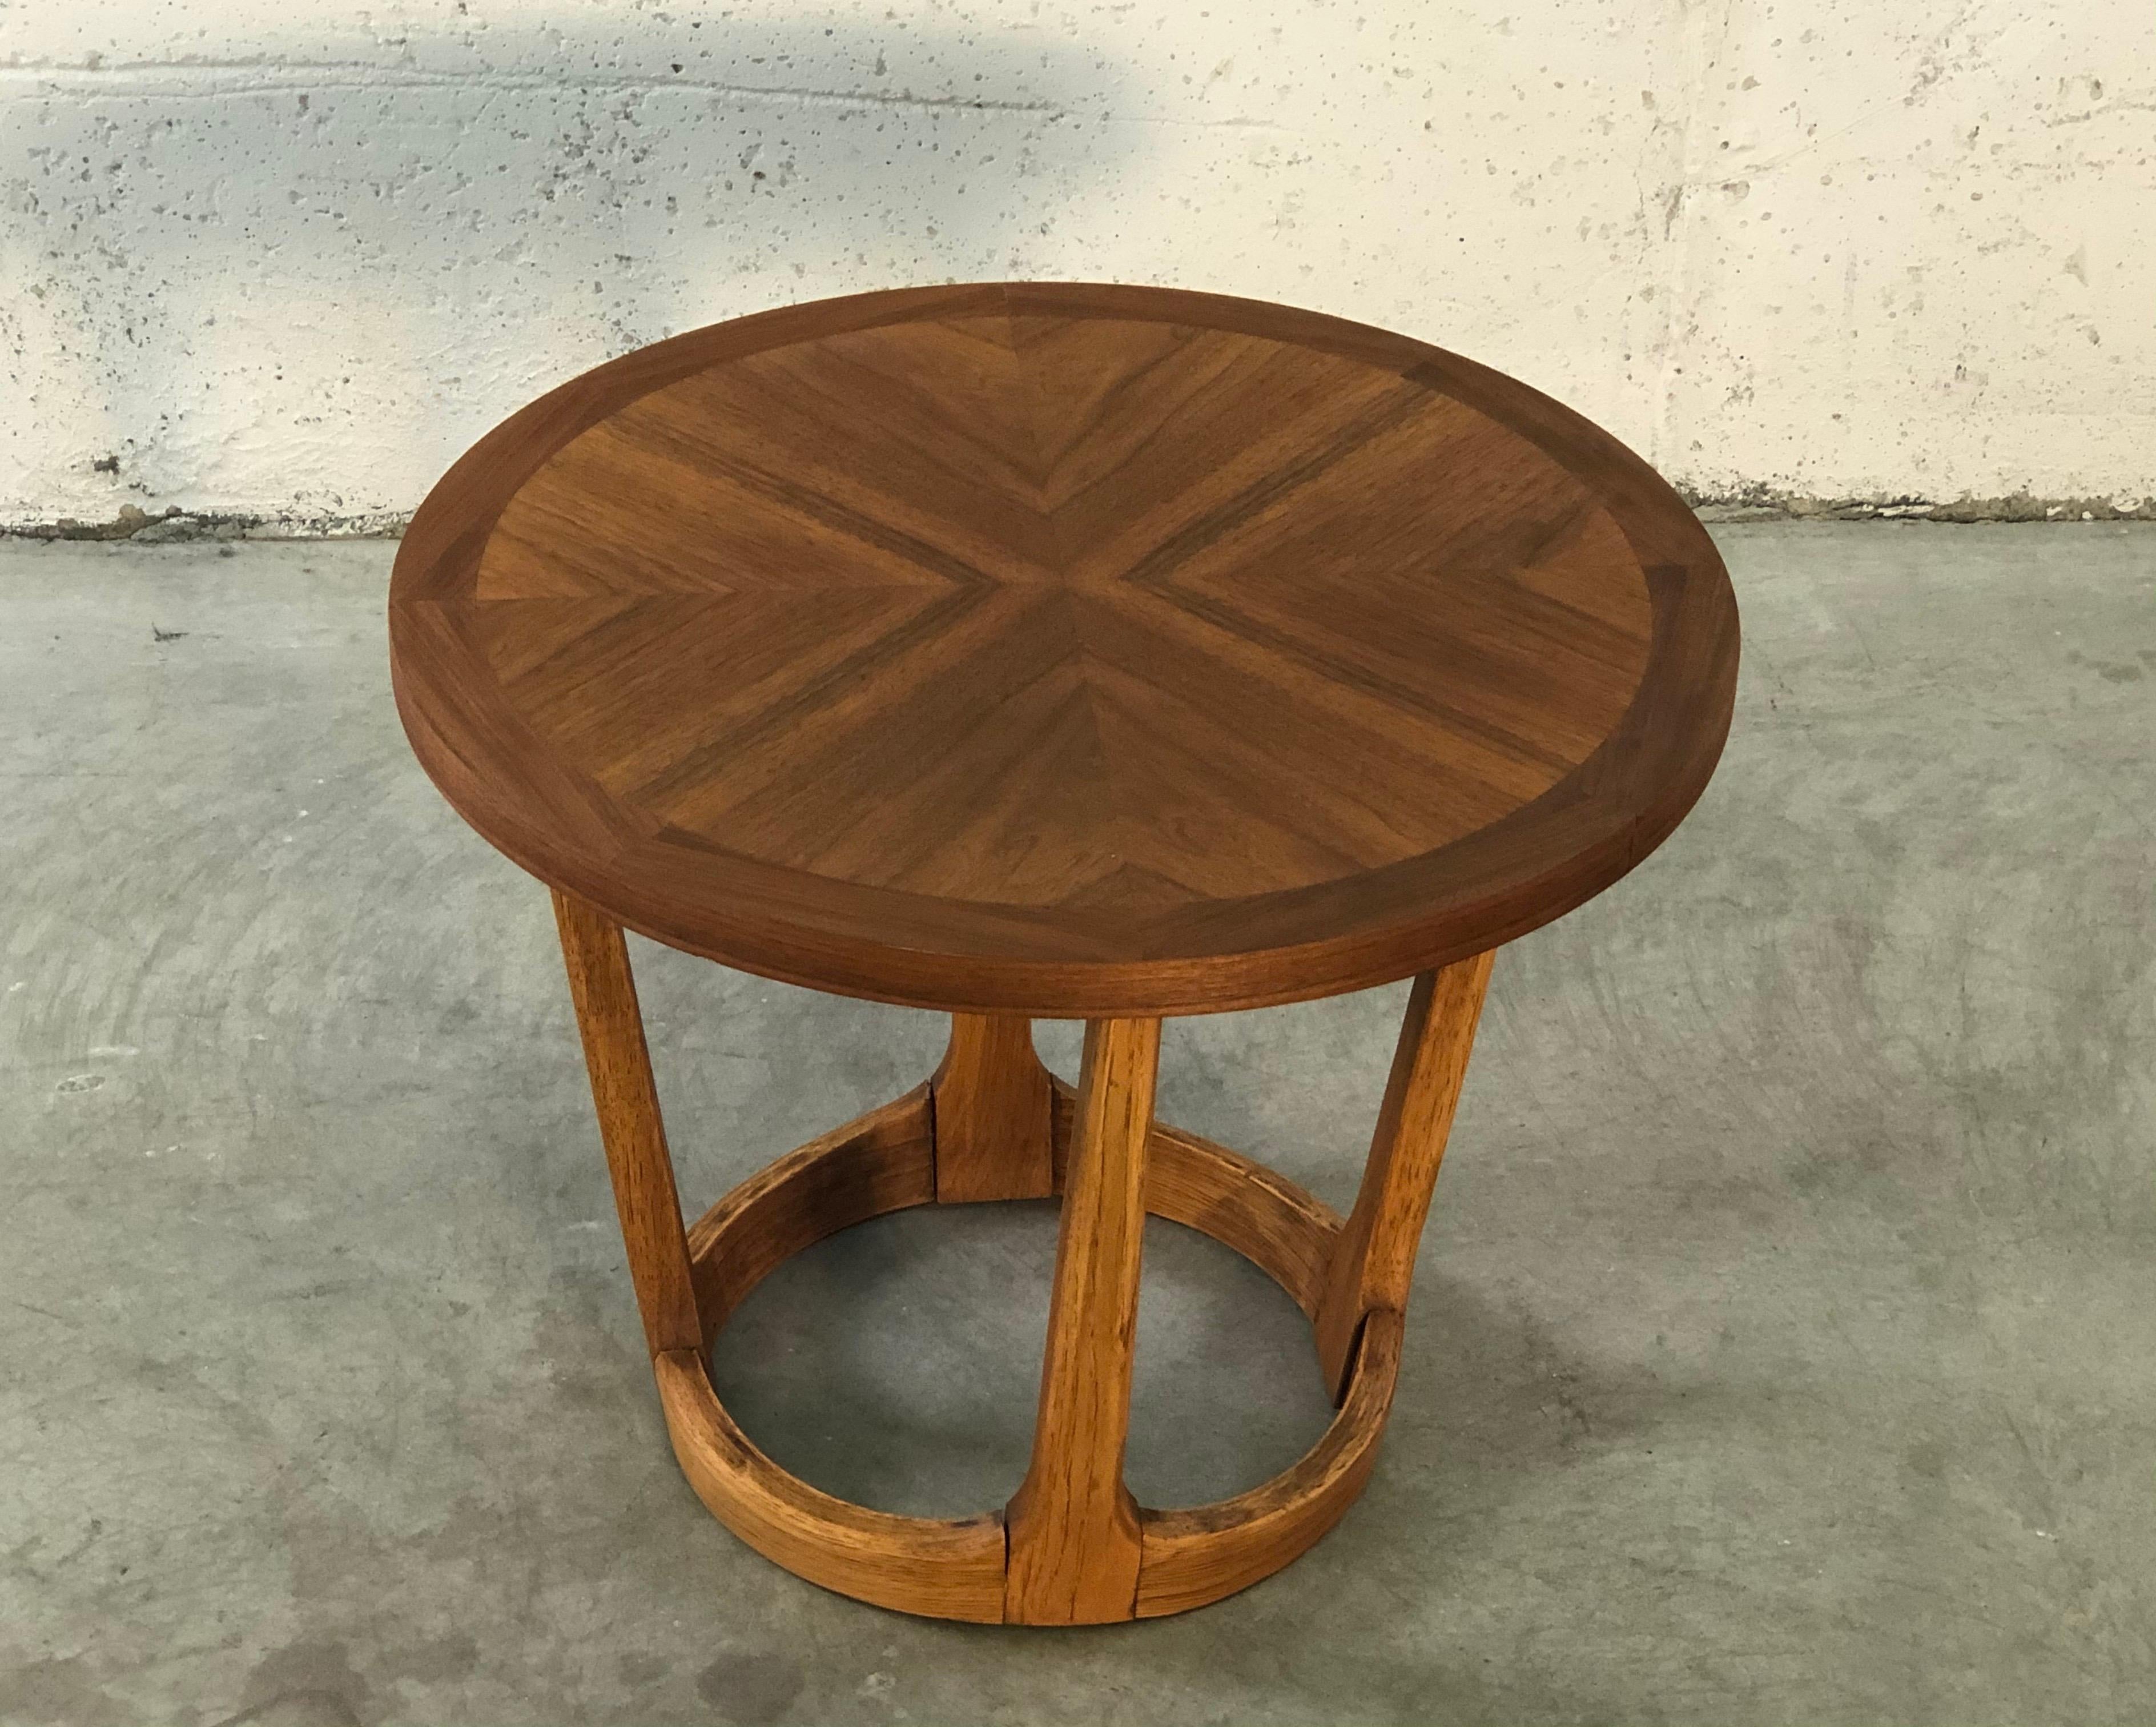 Vintage 1960s small round walnut wood side table by Lane Furniture Co. In refinished condition. Marked underneath.